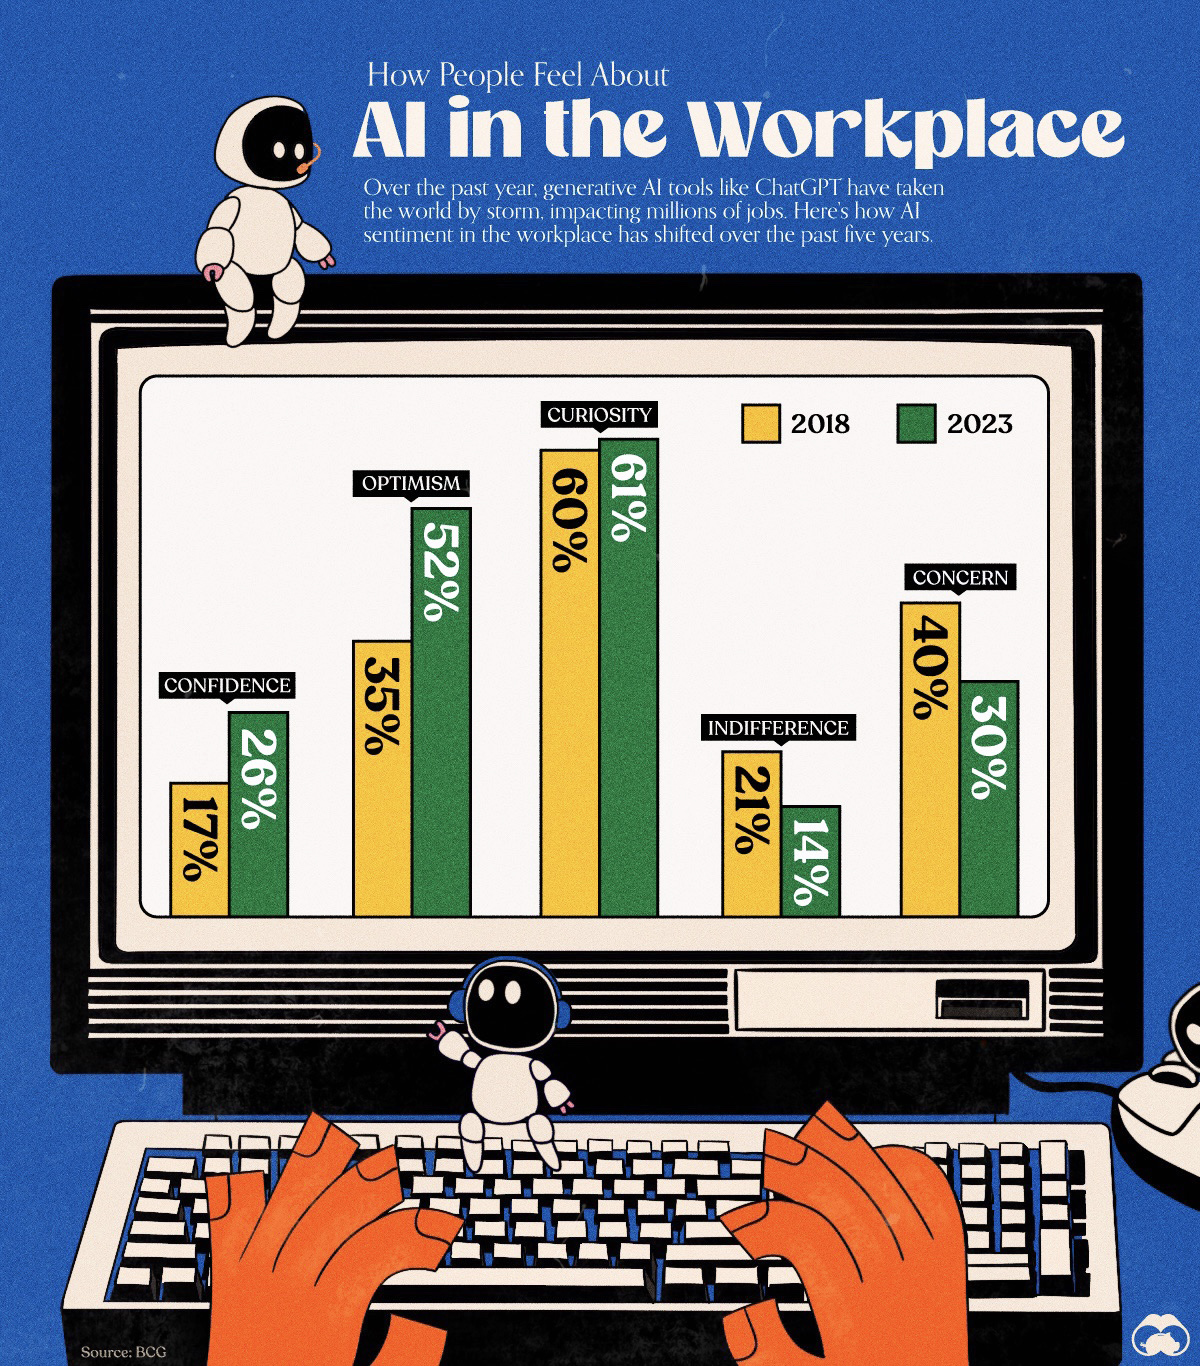 Charting the Changing Sentiment Towards AI in the Workplace